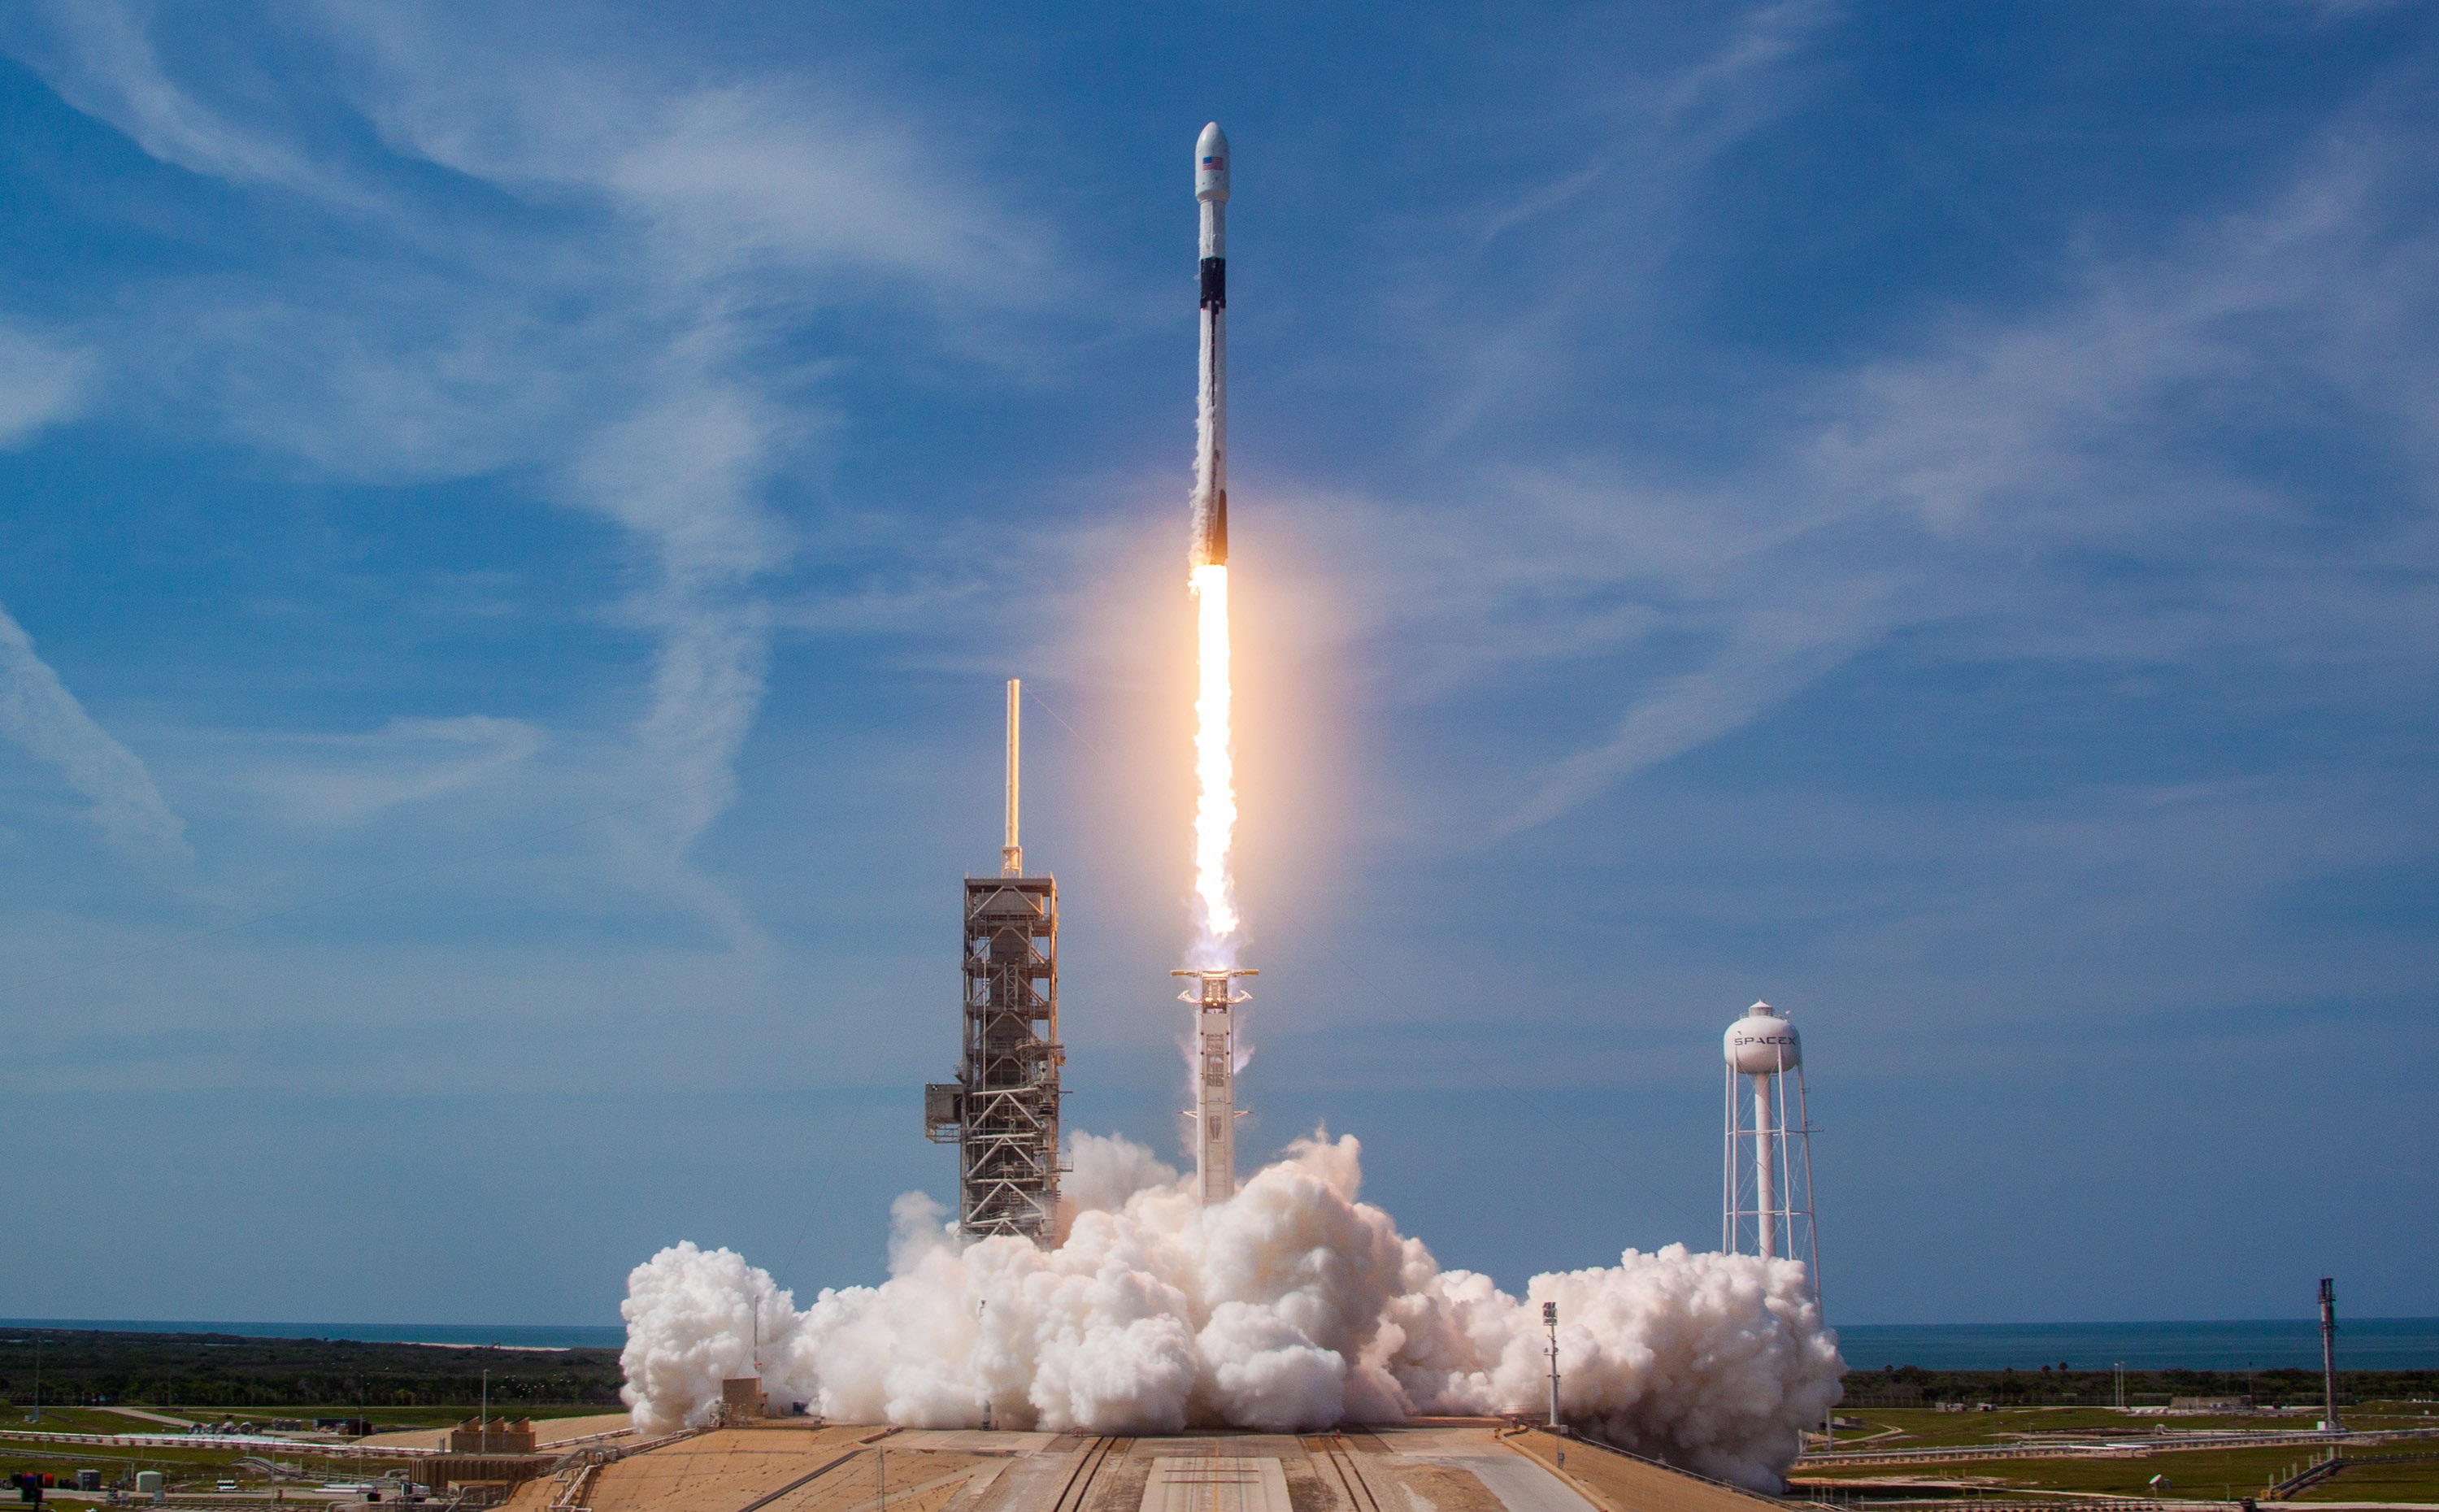 Falcon 9 rocket will crash into the moon after 7 years of wandering in space